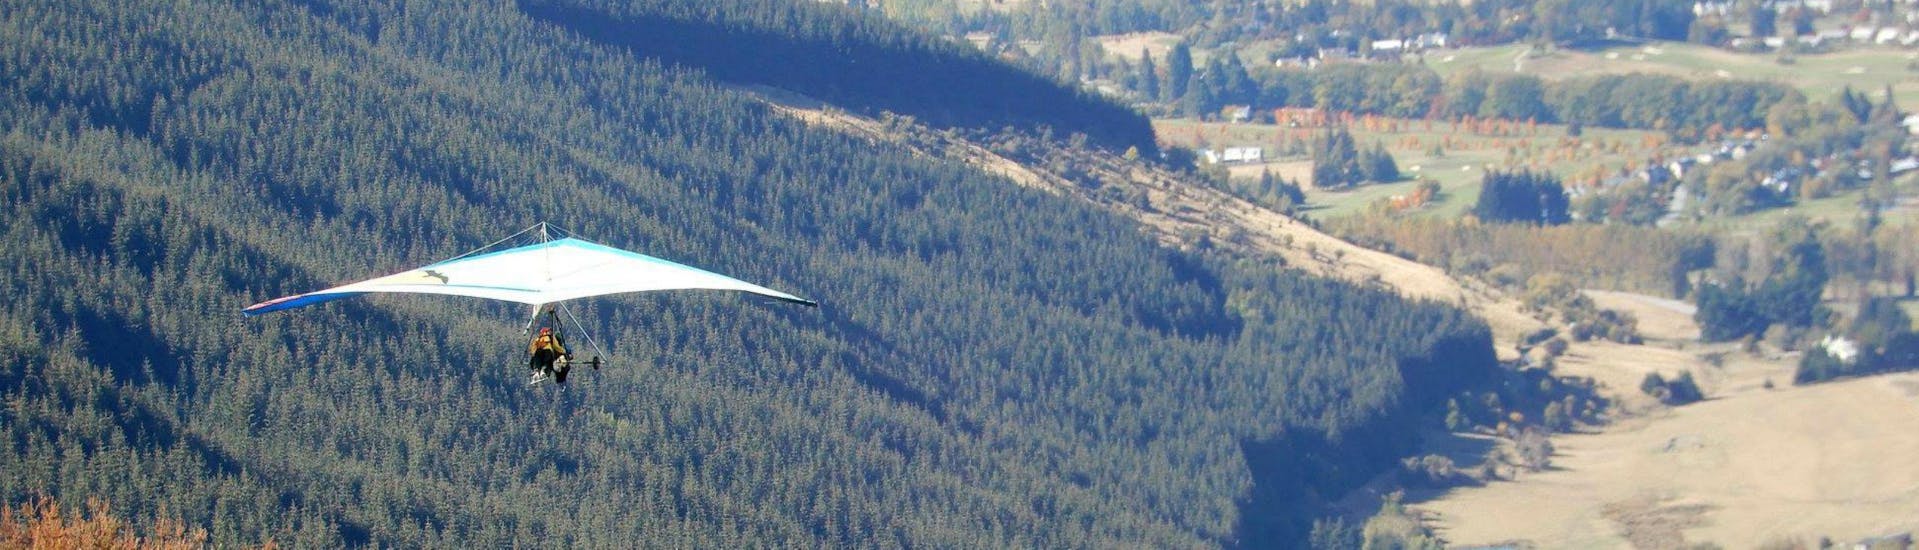 A hang glider from Skytrek Queenstown is gently floating above the woodland while Summer Hang Gliding in Queenstown.